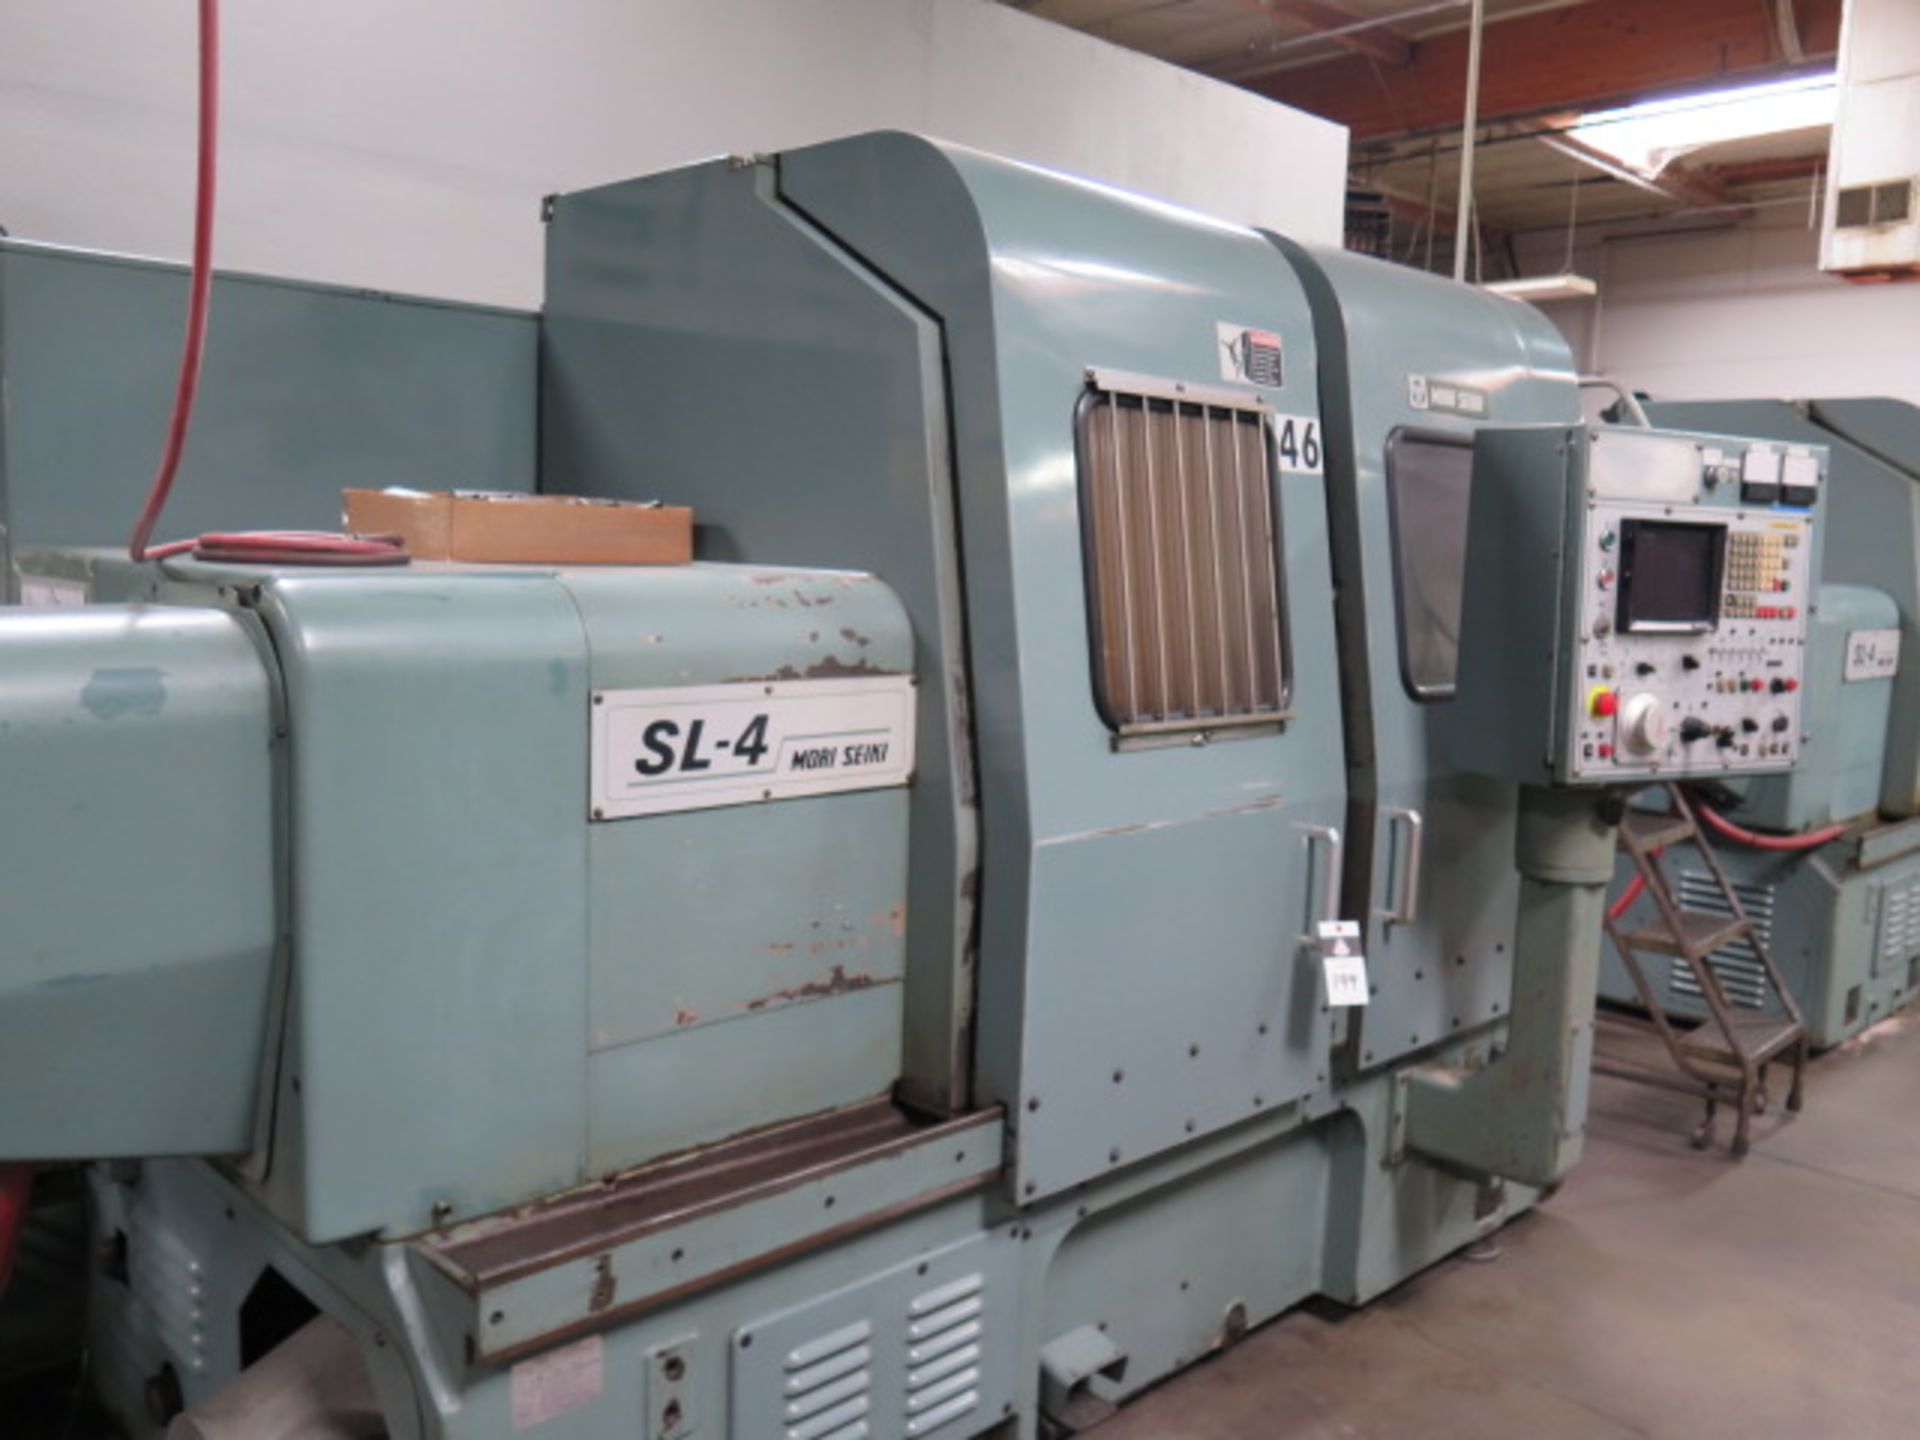 Mori Seiki SL-4A CNC Turning Center s/n 1033 w. Fanuc 6T Controls, 10-Station Turret, SOLD AS IS - Image 3 of 11